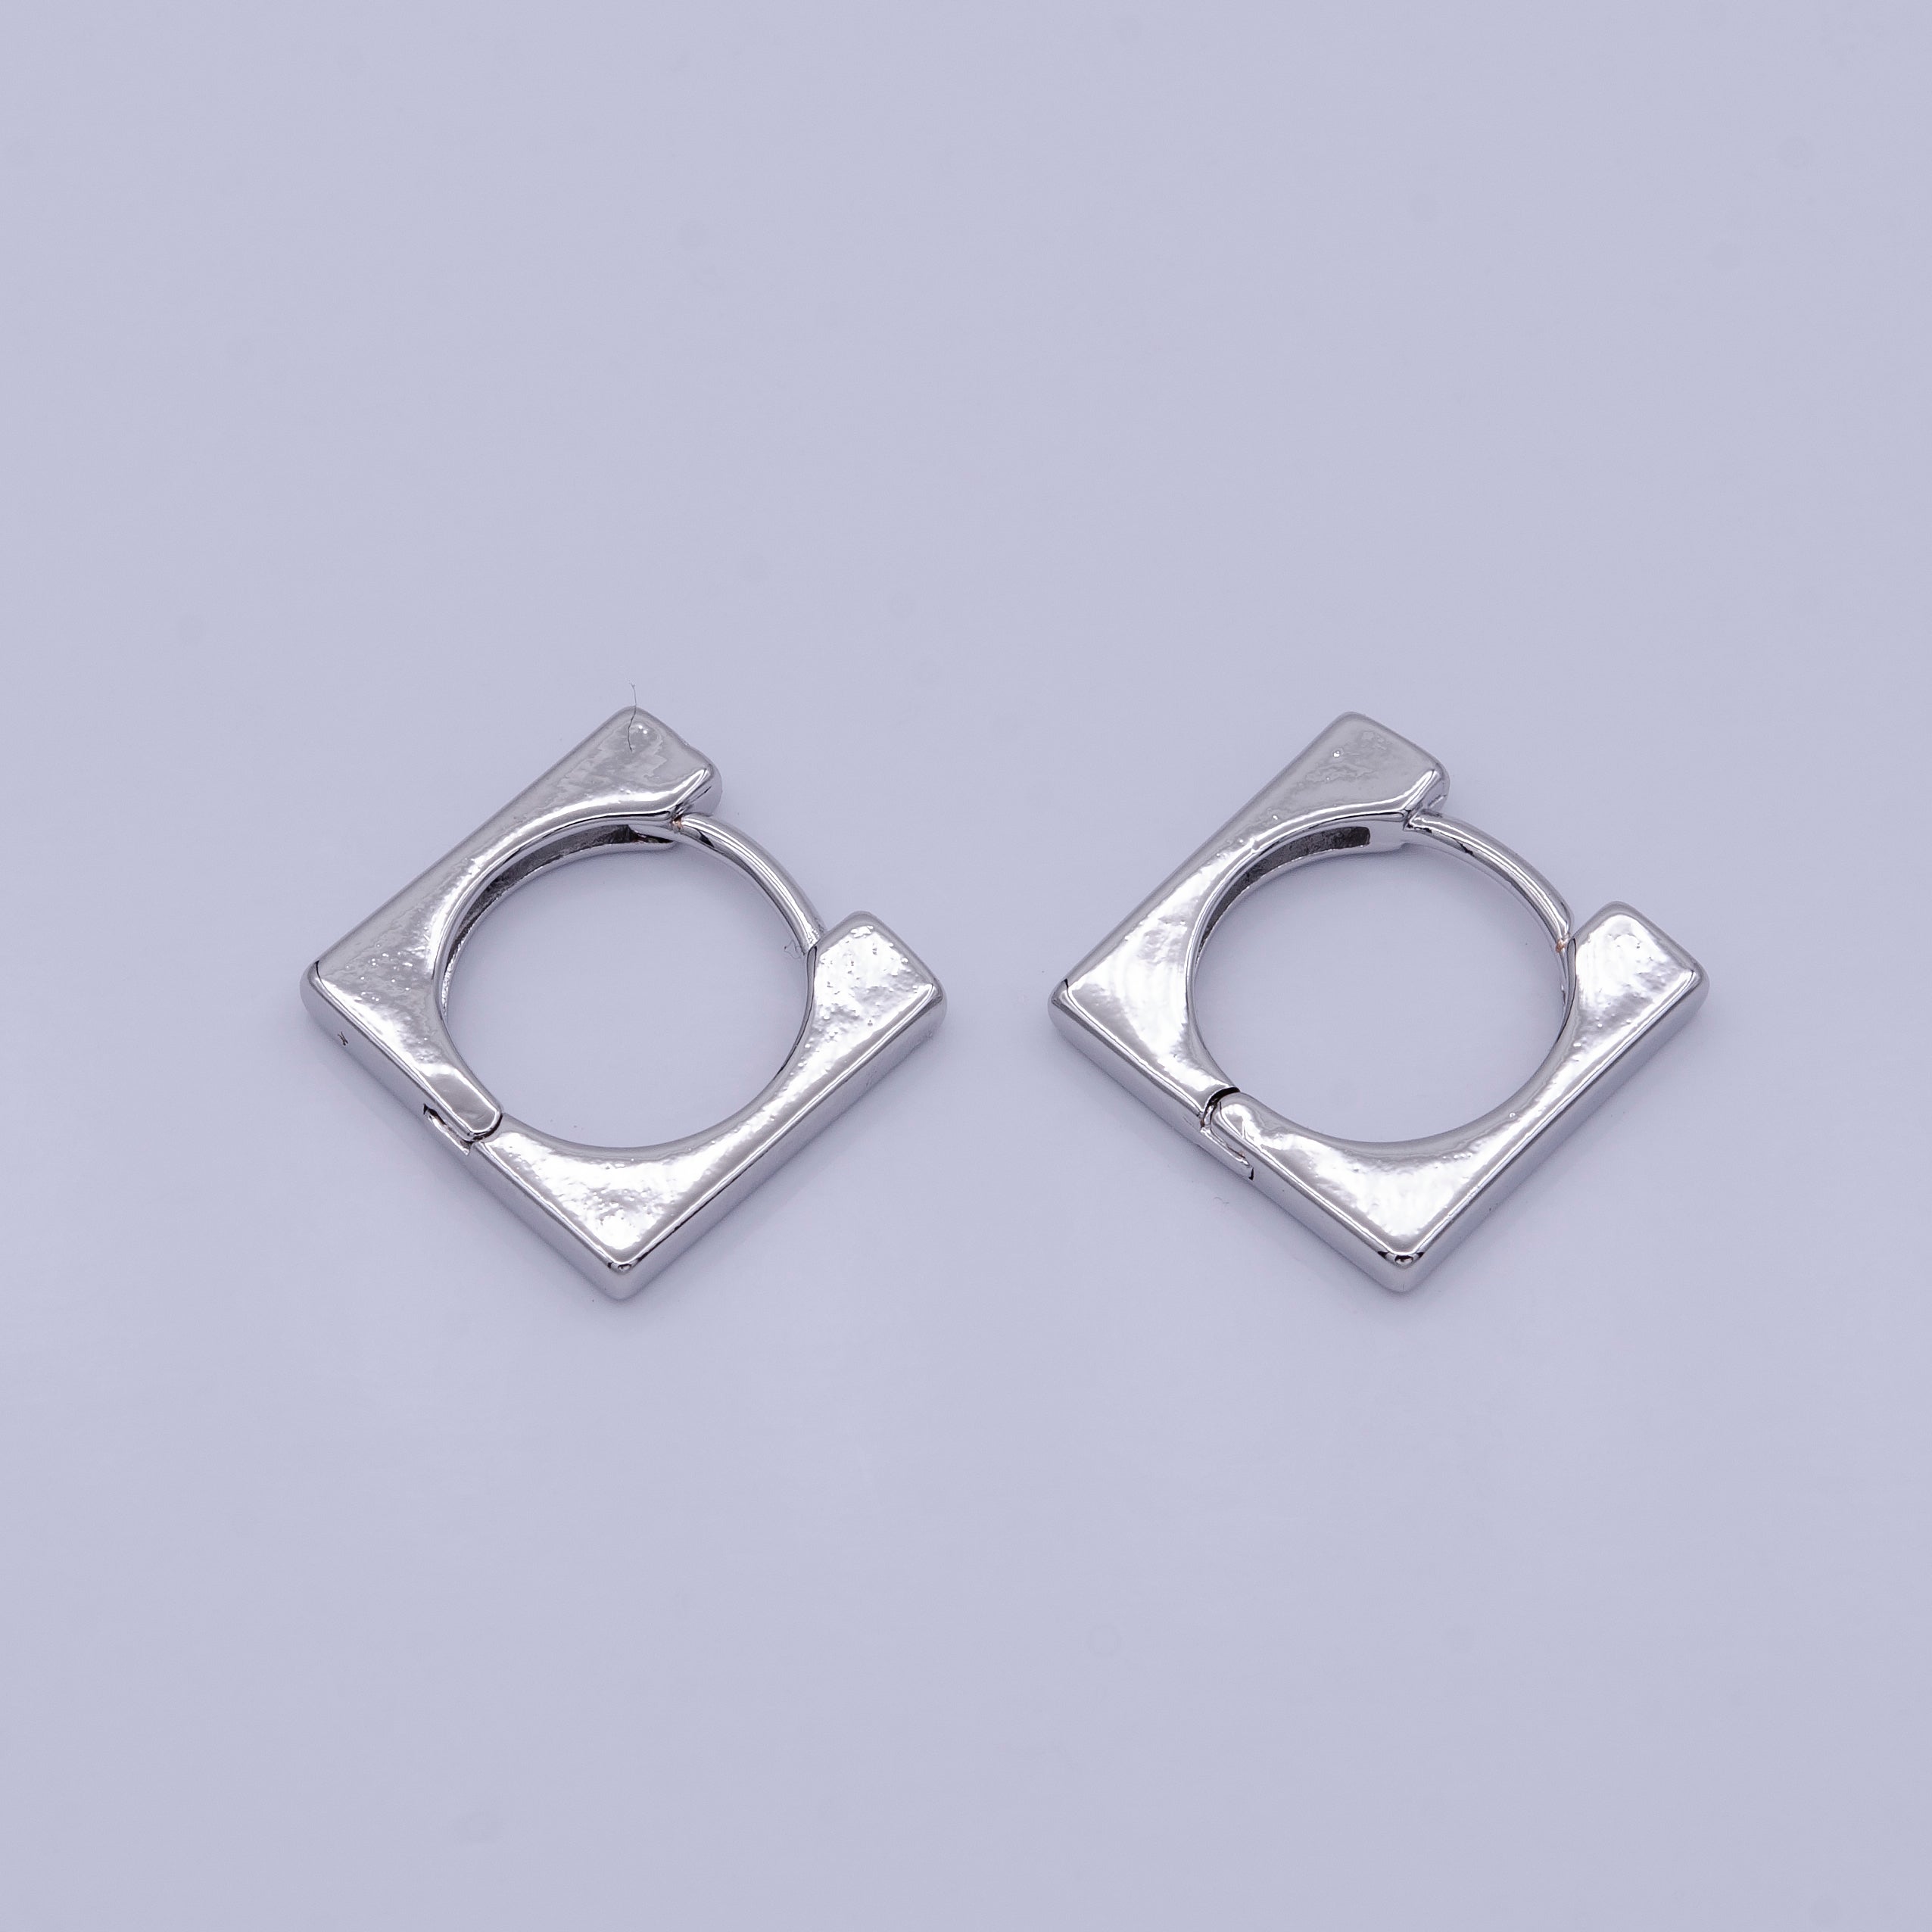 Gold, Silver 14mm Square Rounded Thin Huggie Earrings | AD875 AD876 - DLUXCA